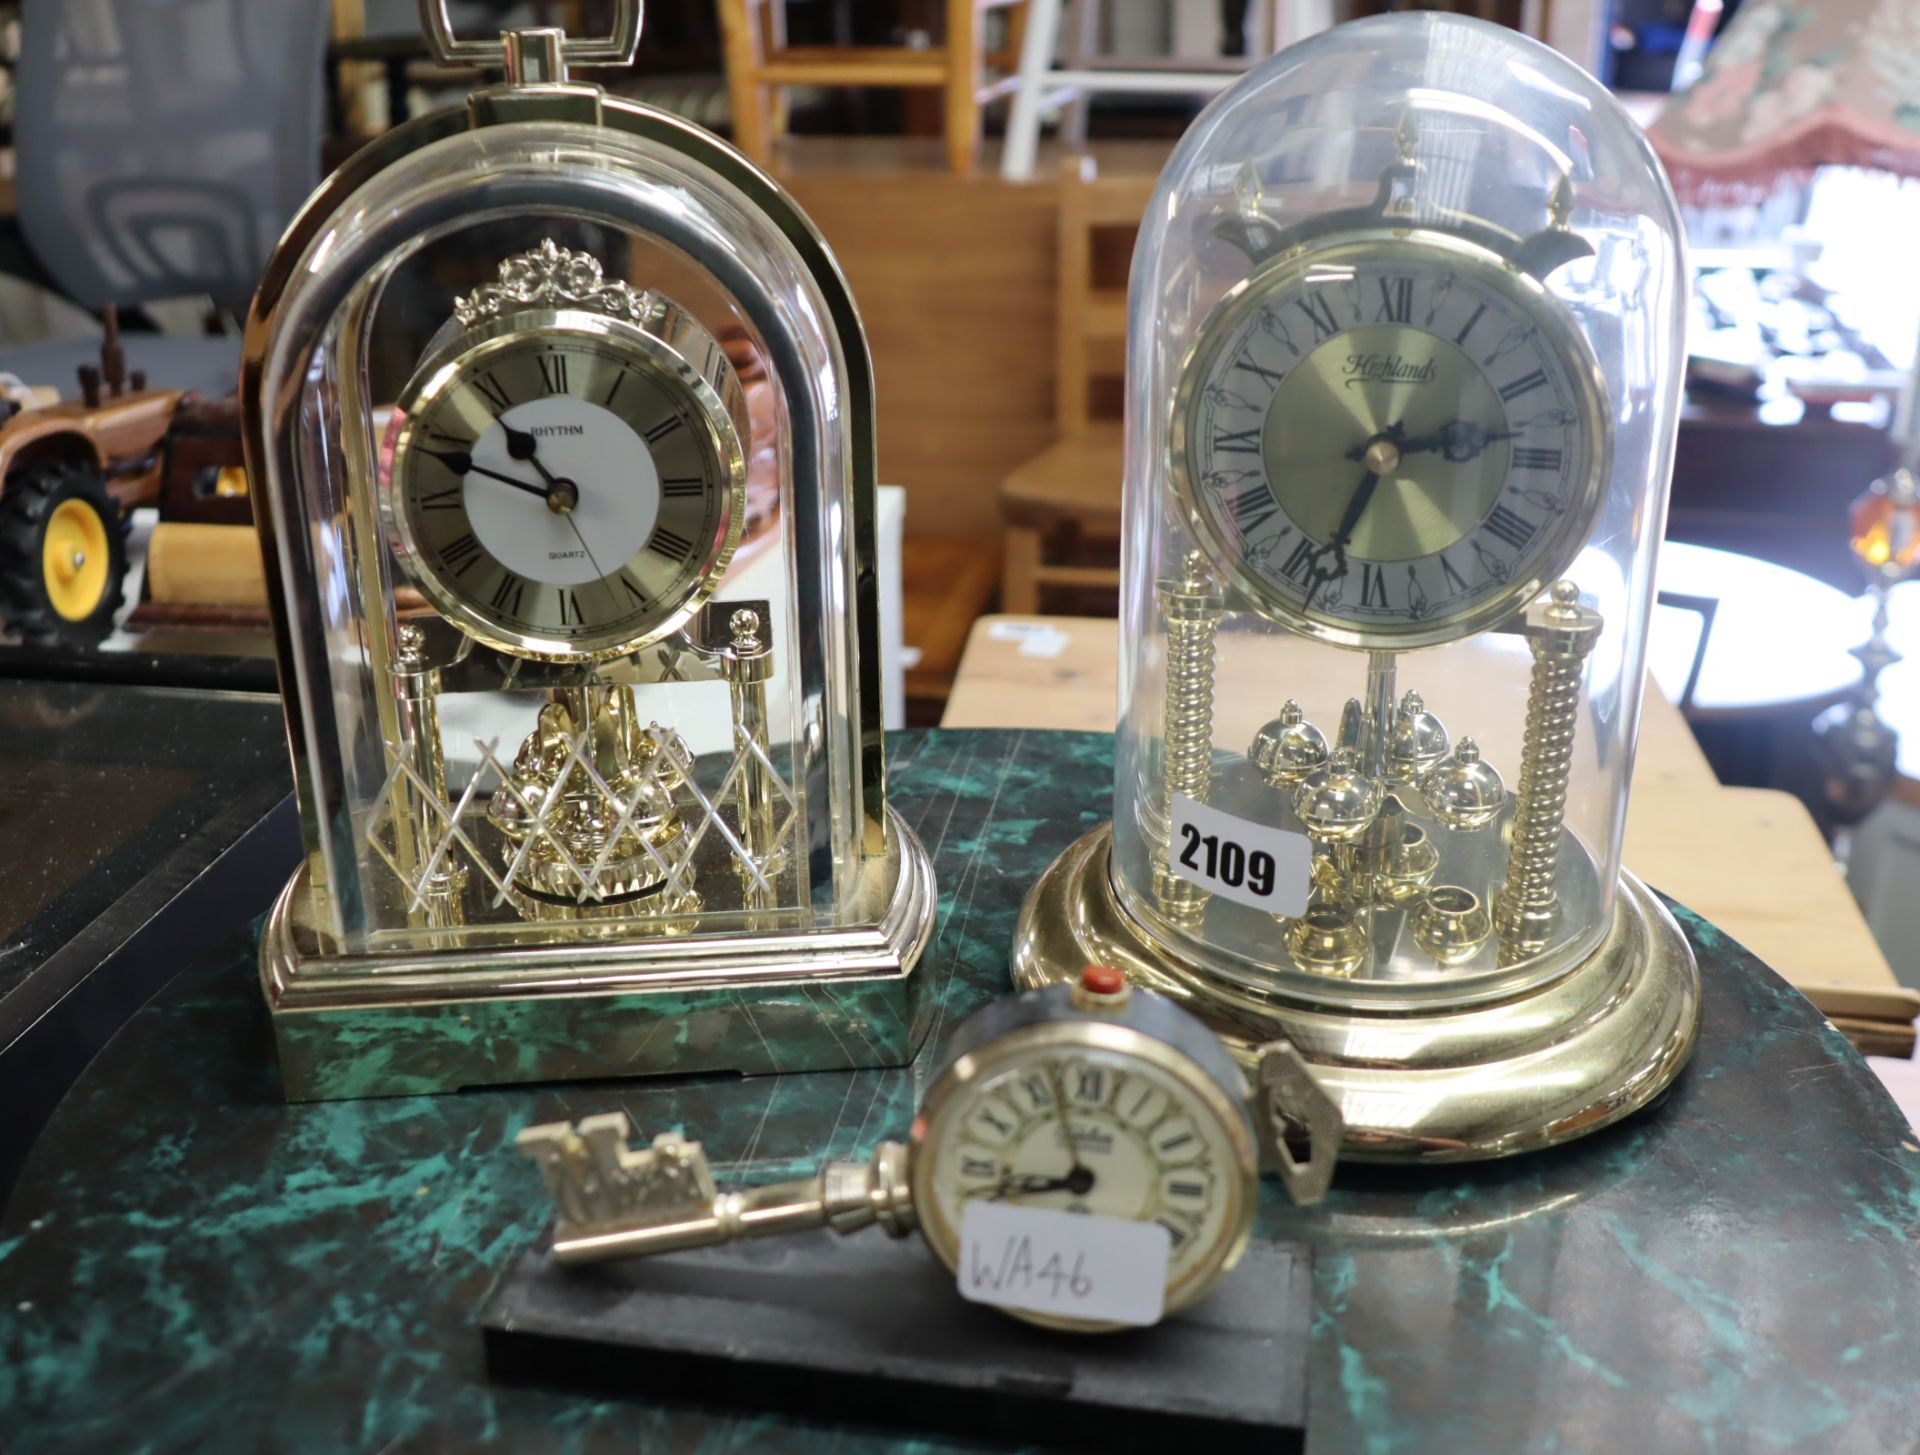 Small Kamhen key shaped clock with 2 brass effect mantle clocks